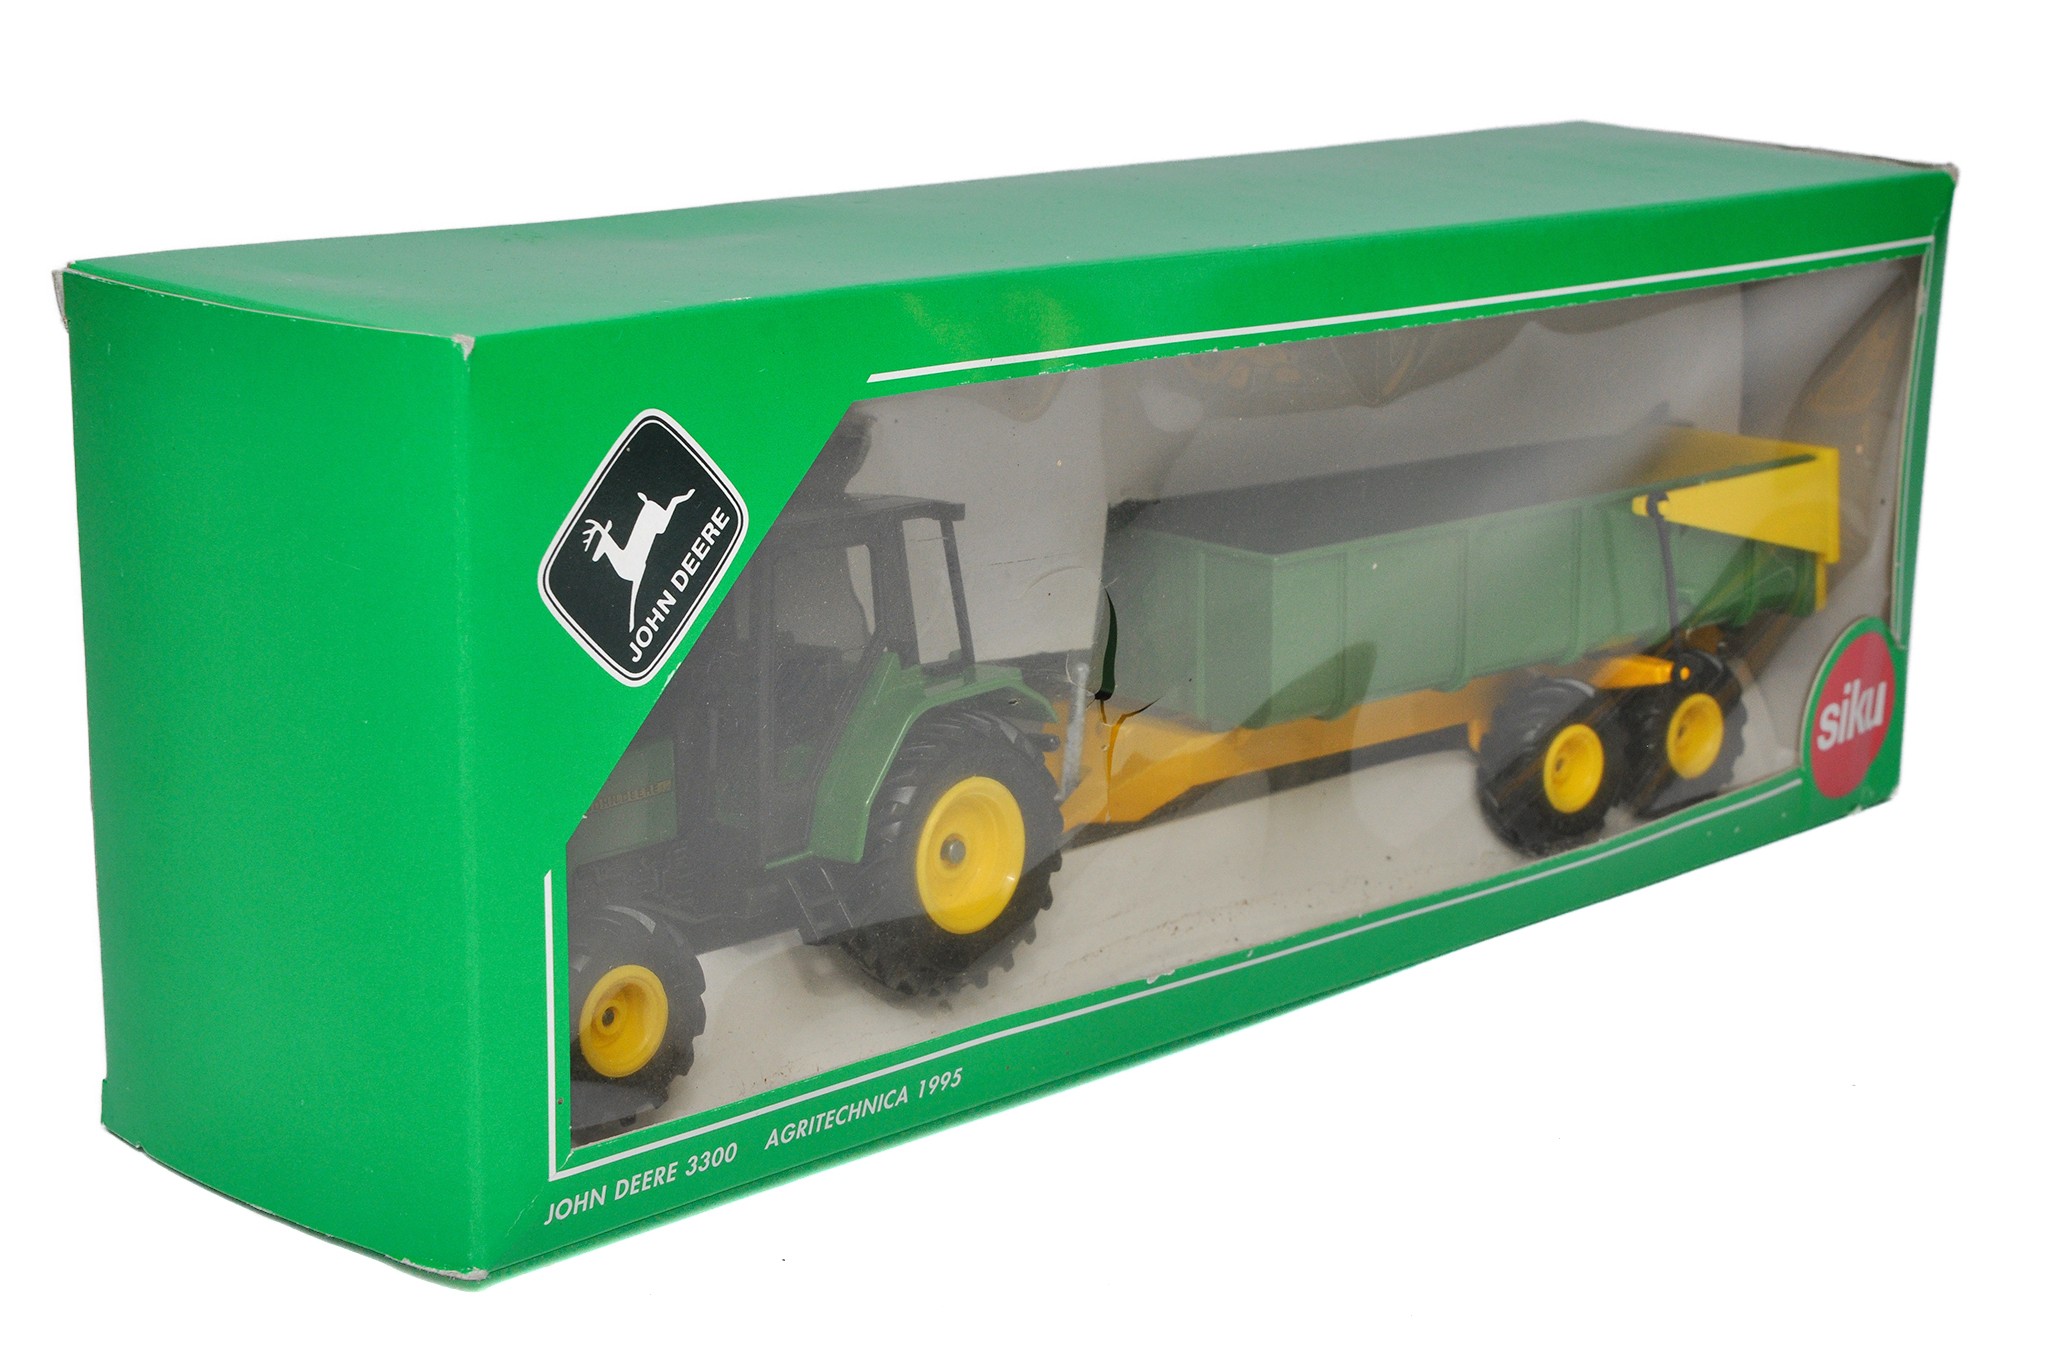 Siku 1/32 farm model issue comprising John Deere 3300 Tractor set for Agritechnica 1995. Looks to be